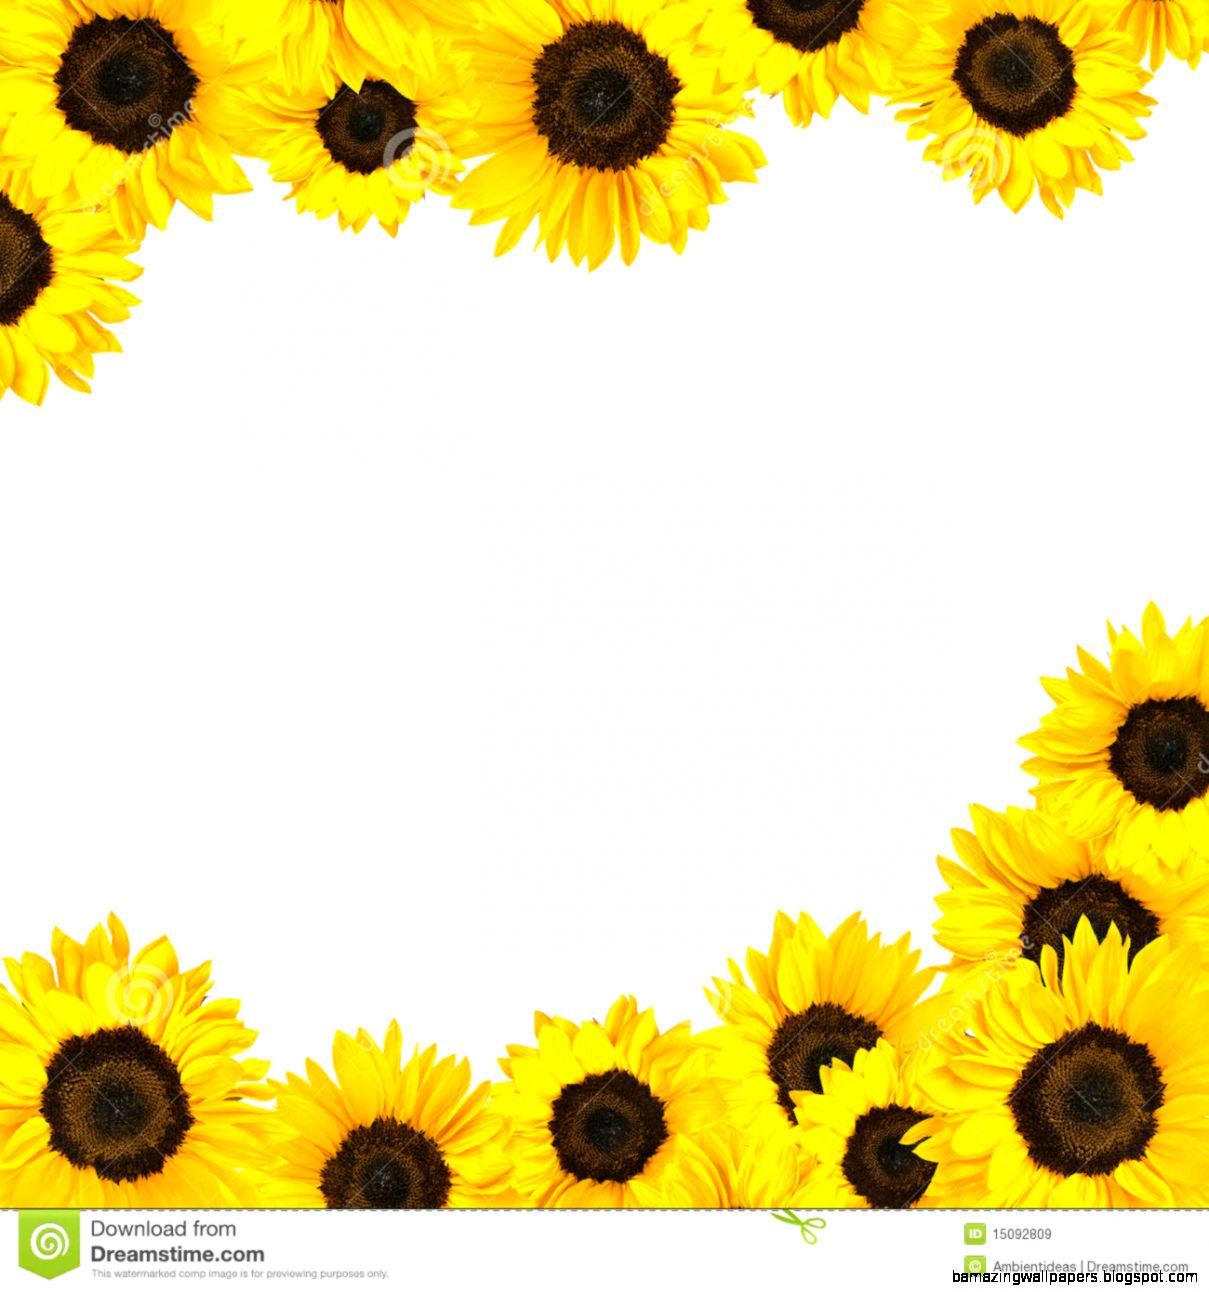 Sunflower Border Clipart | Amazing Wallpapers